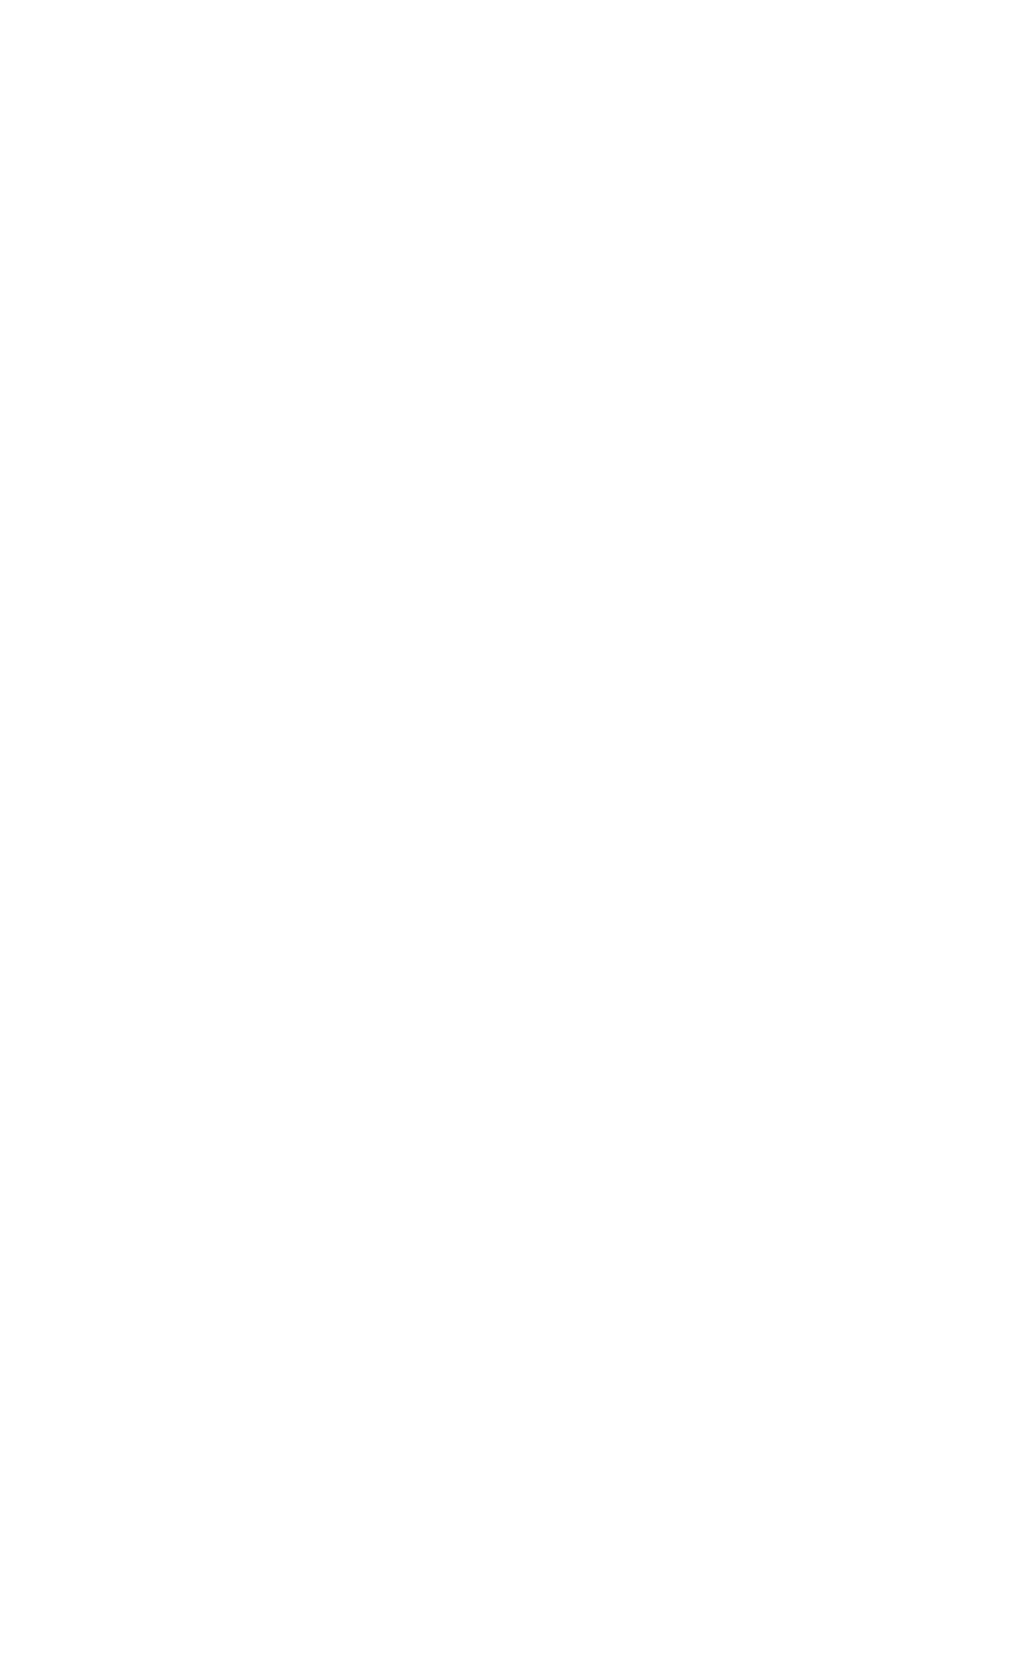 Art with text 'Good Vibes Only'